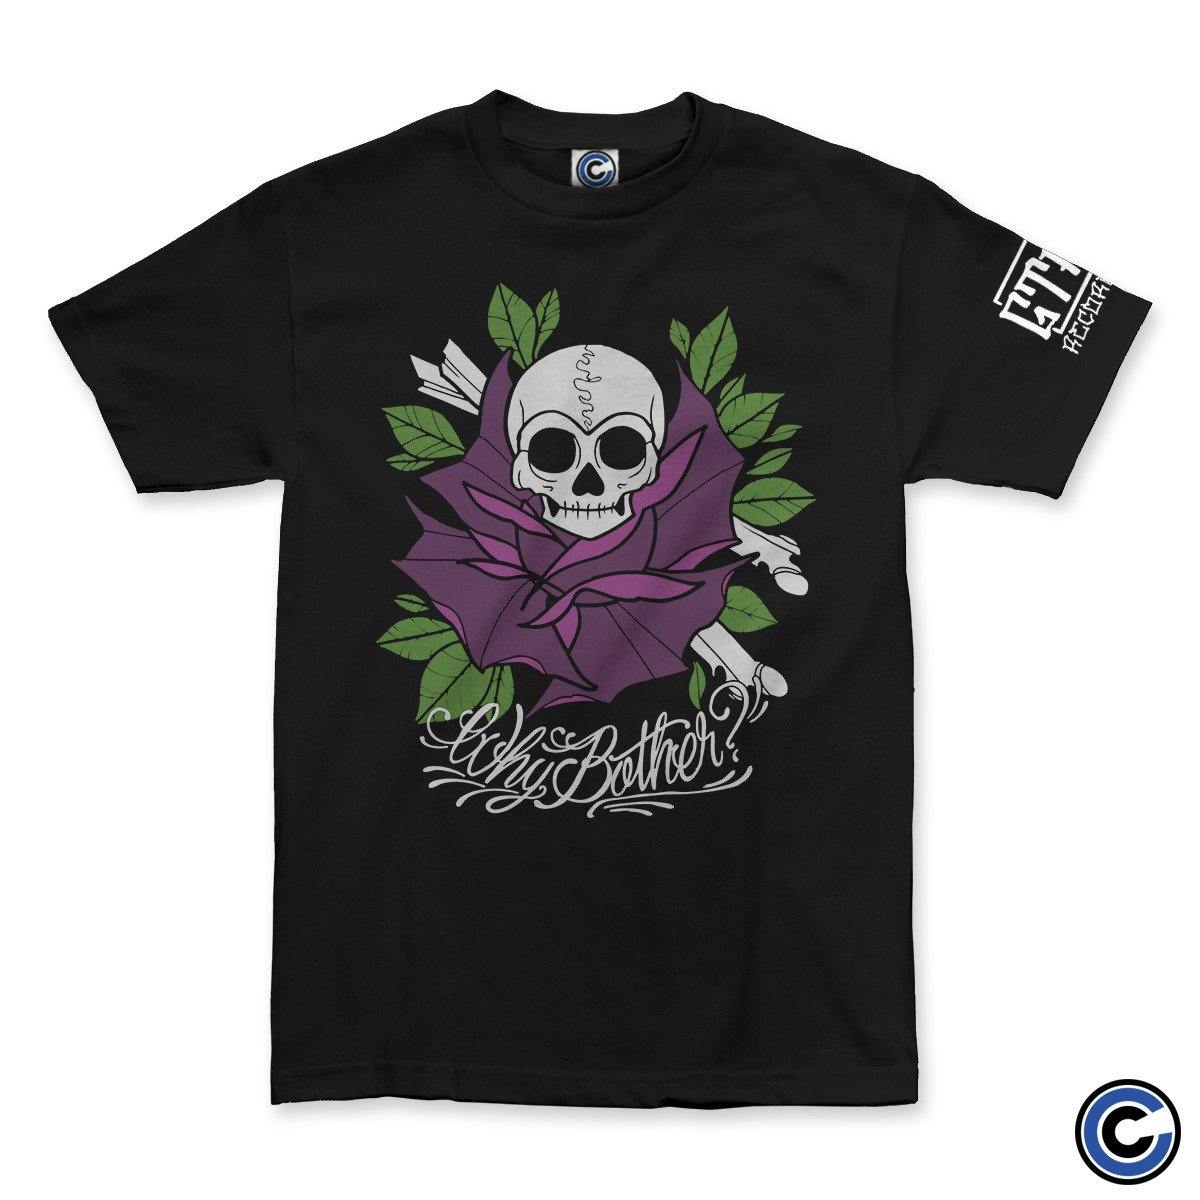 Buy – Why Bother? "Skull Rose" Black Shirt – Band & Music Merch – Cold Cuts Merch